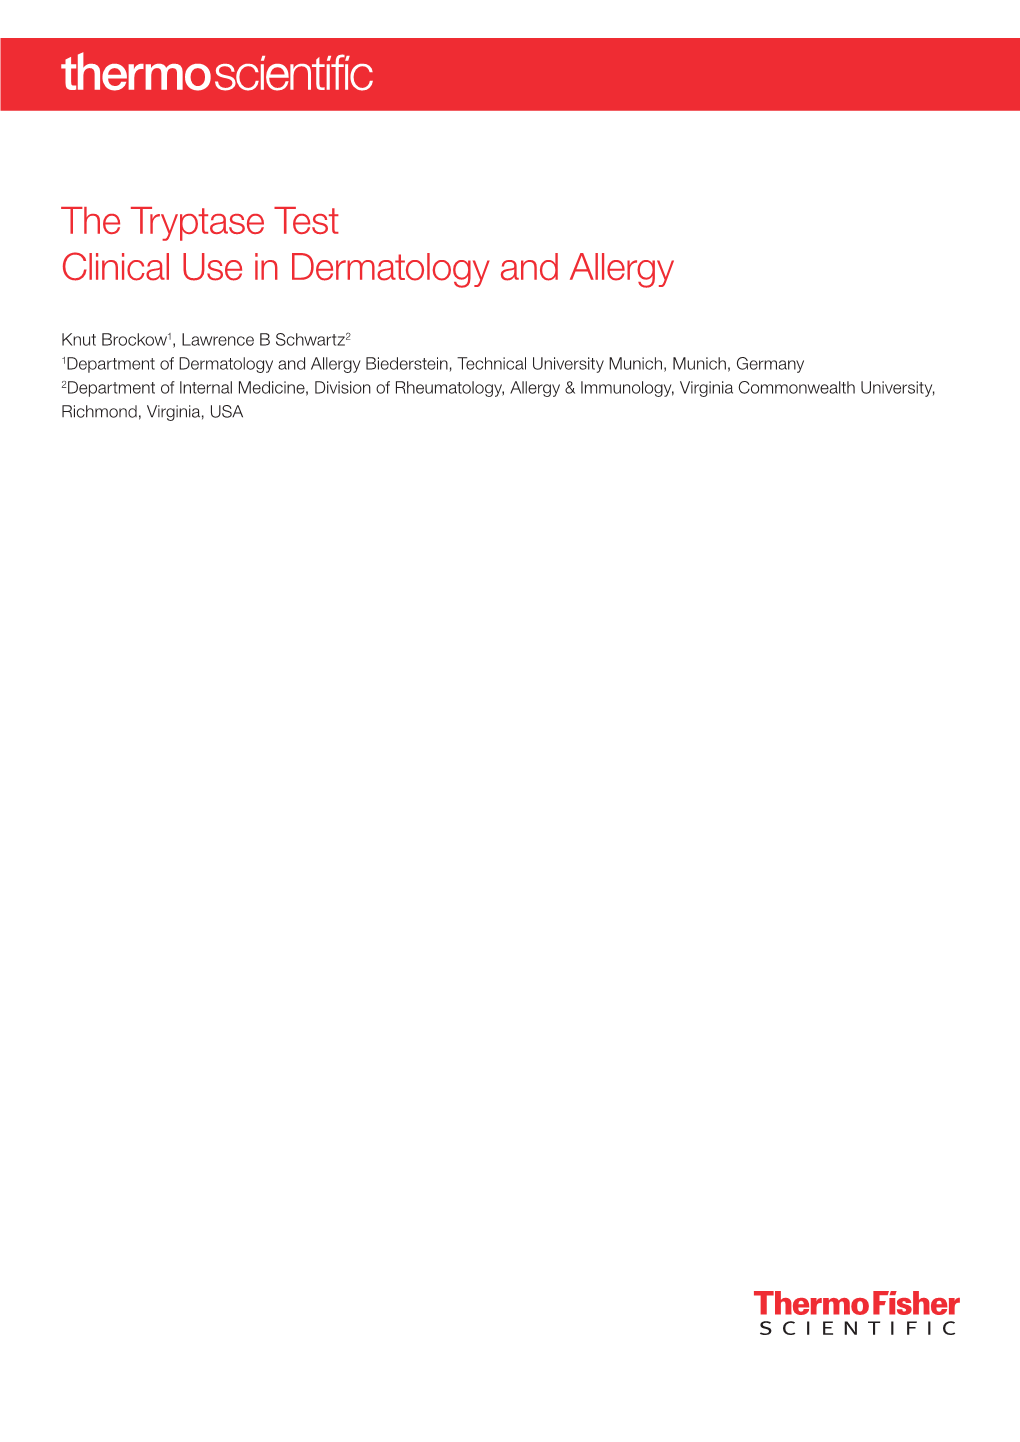 The Tryptase Test Clinical Use in Dermatology and Allergy